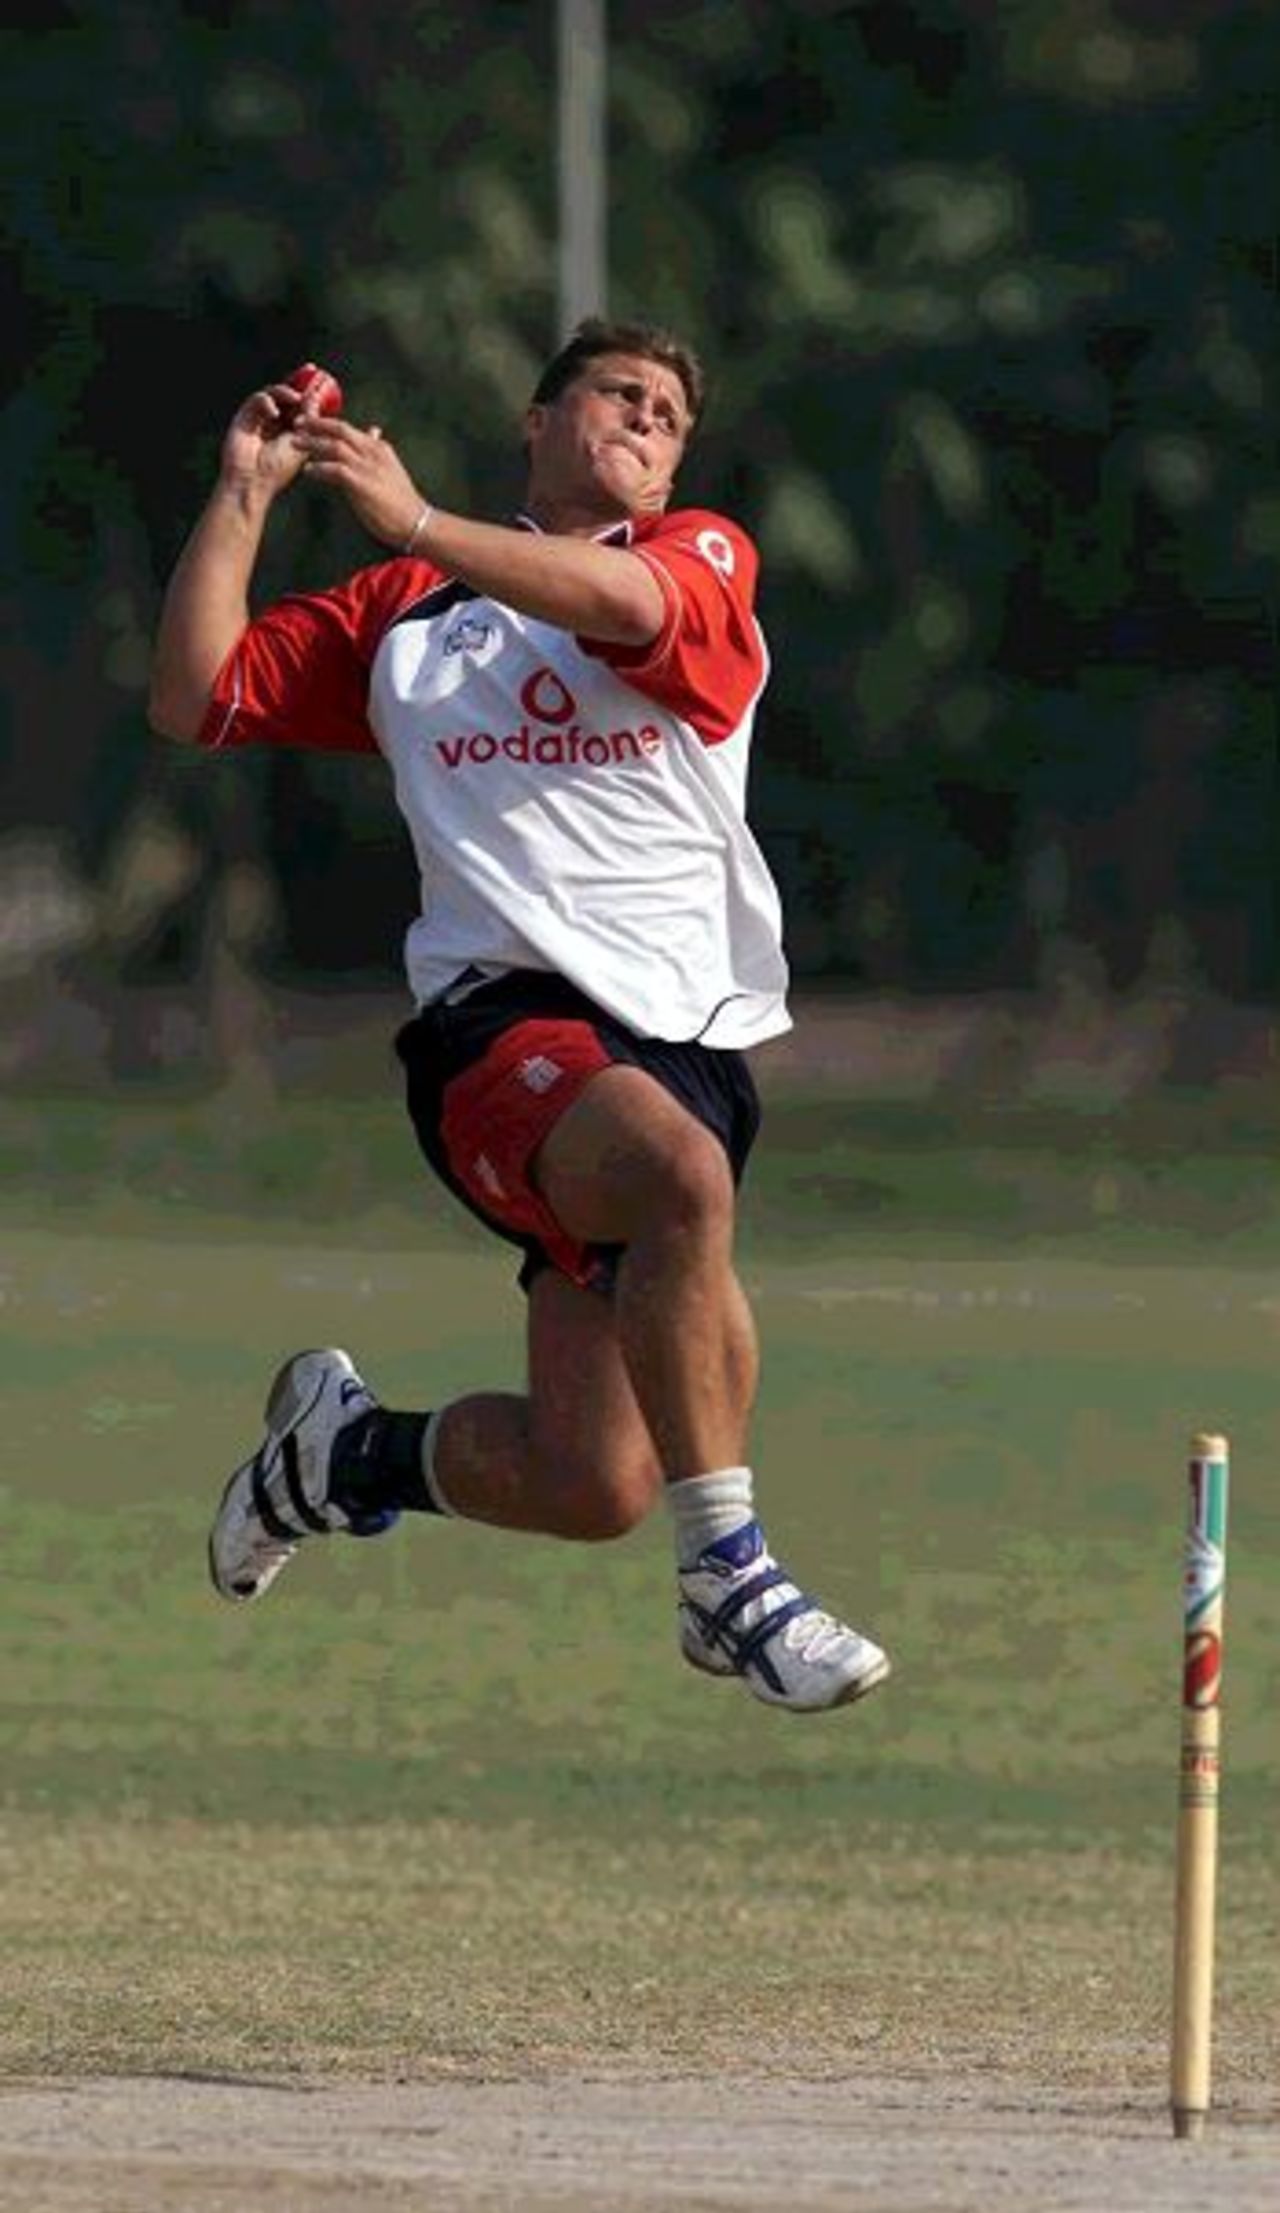 27 Nov 2000: Darren Gough of England during fires in a ball during practice in preparation for the 2nd test match against Pakistan in Faisalabad in Pakistan.